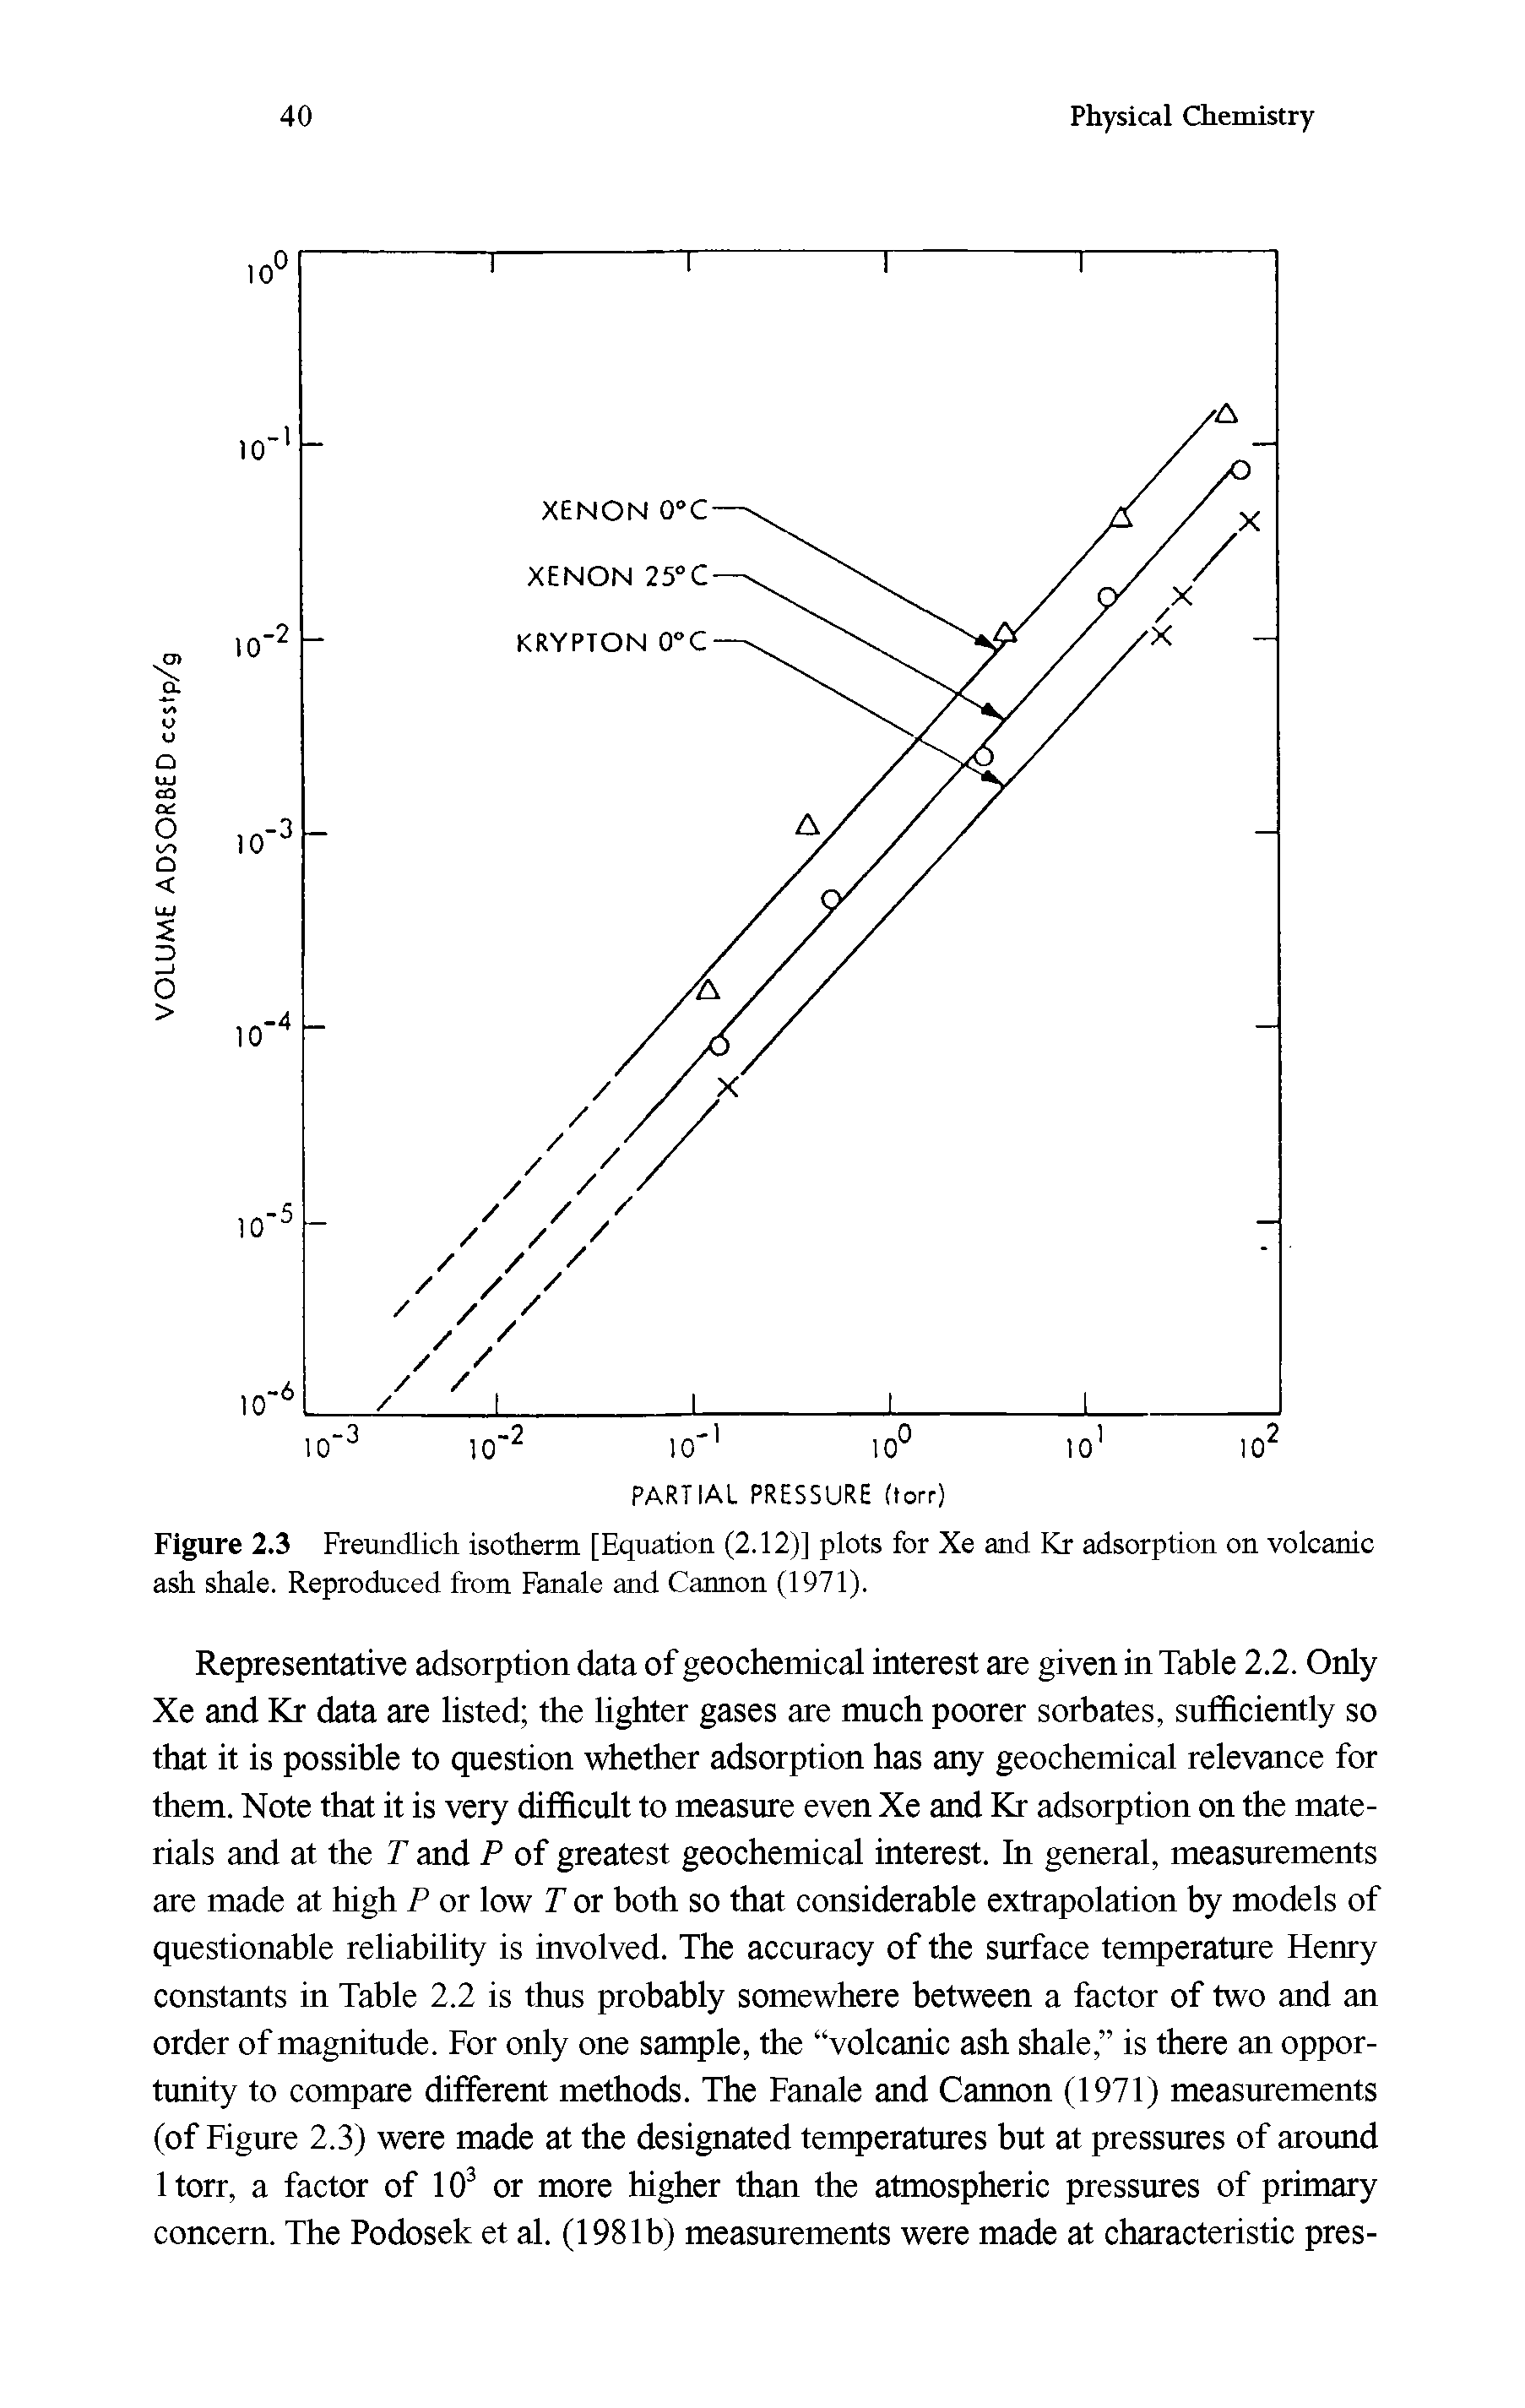 Figure 2.3 Freundlich isotherm [Equation (2.12)] plots for Xe and Kr adsorption on volcanic ash shale. Reproduced from Fanale and Cannon (1971).